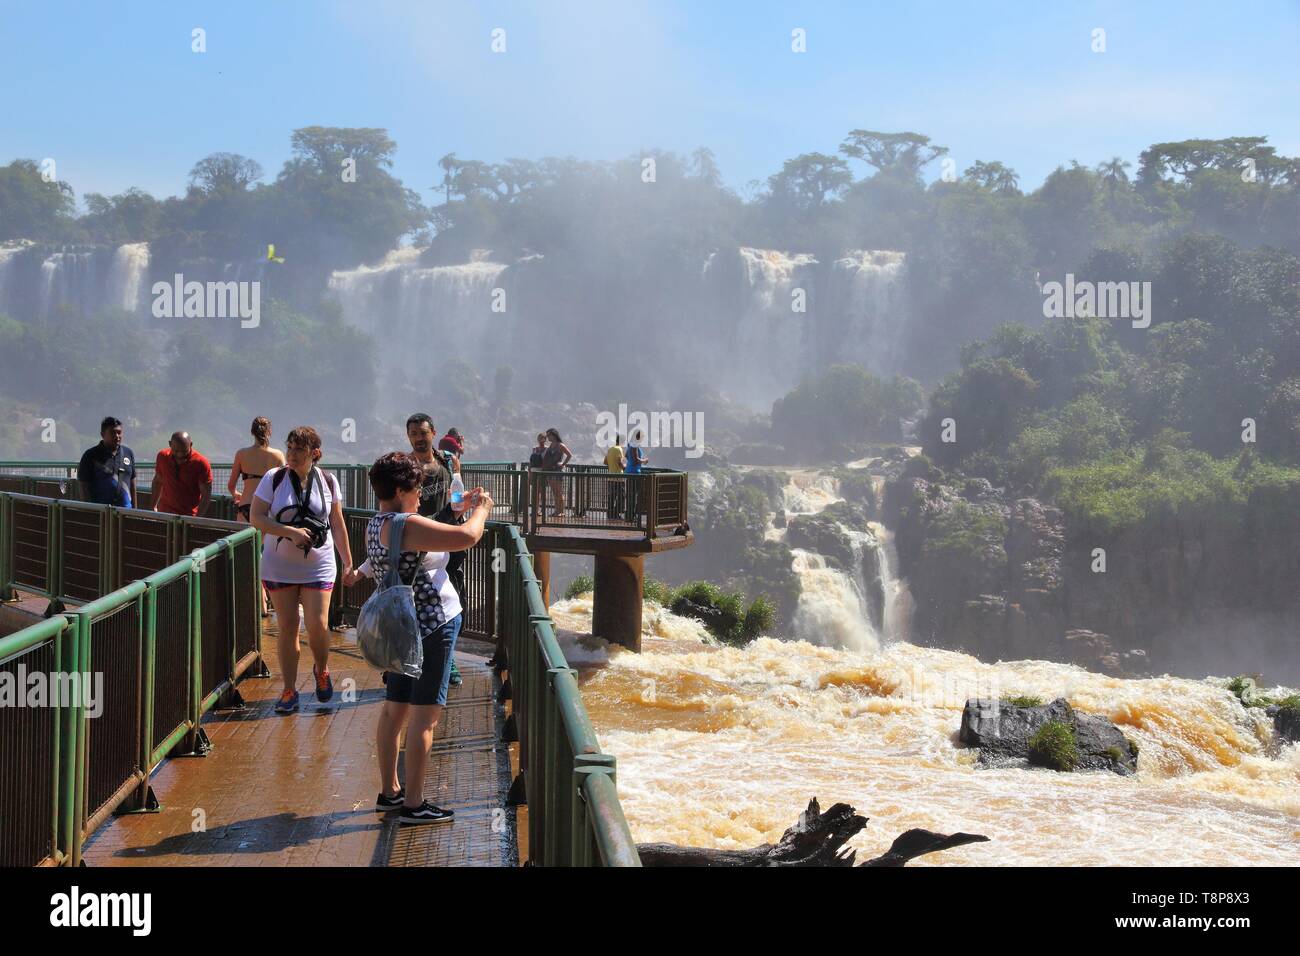 IGUACU NATIONAL PARK, BRAZIL - OCTOBER 9, 2014: People visit Iguacu National Park in Brazil. The park was established in 1939 and is a UNESCO World He Stock Photo